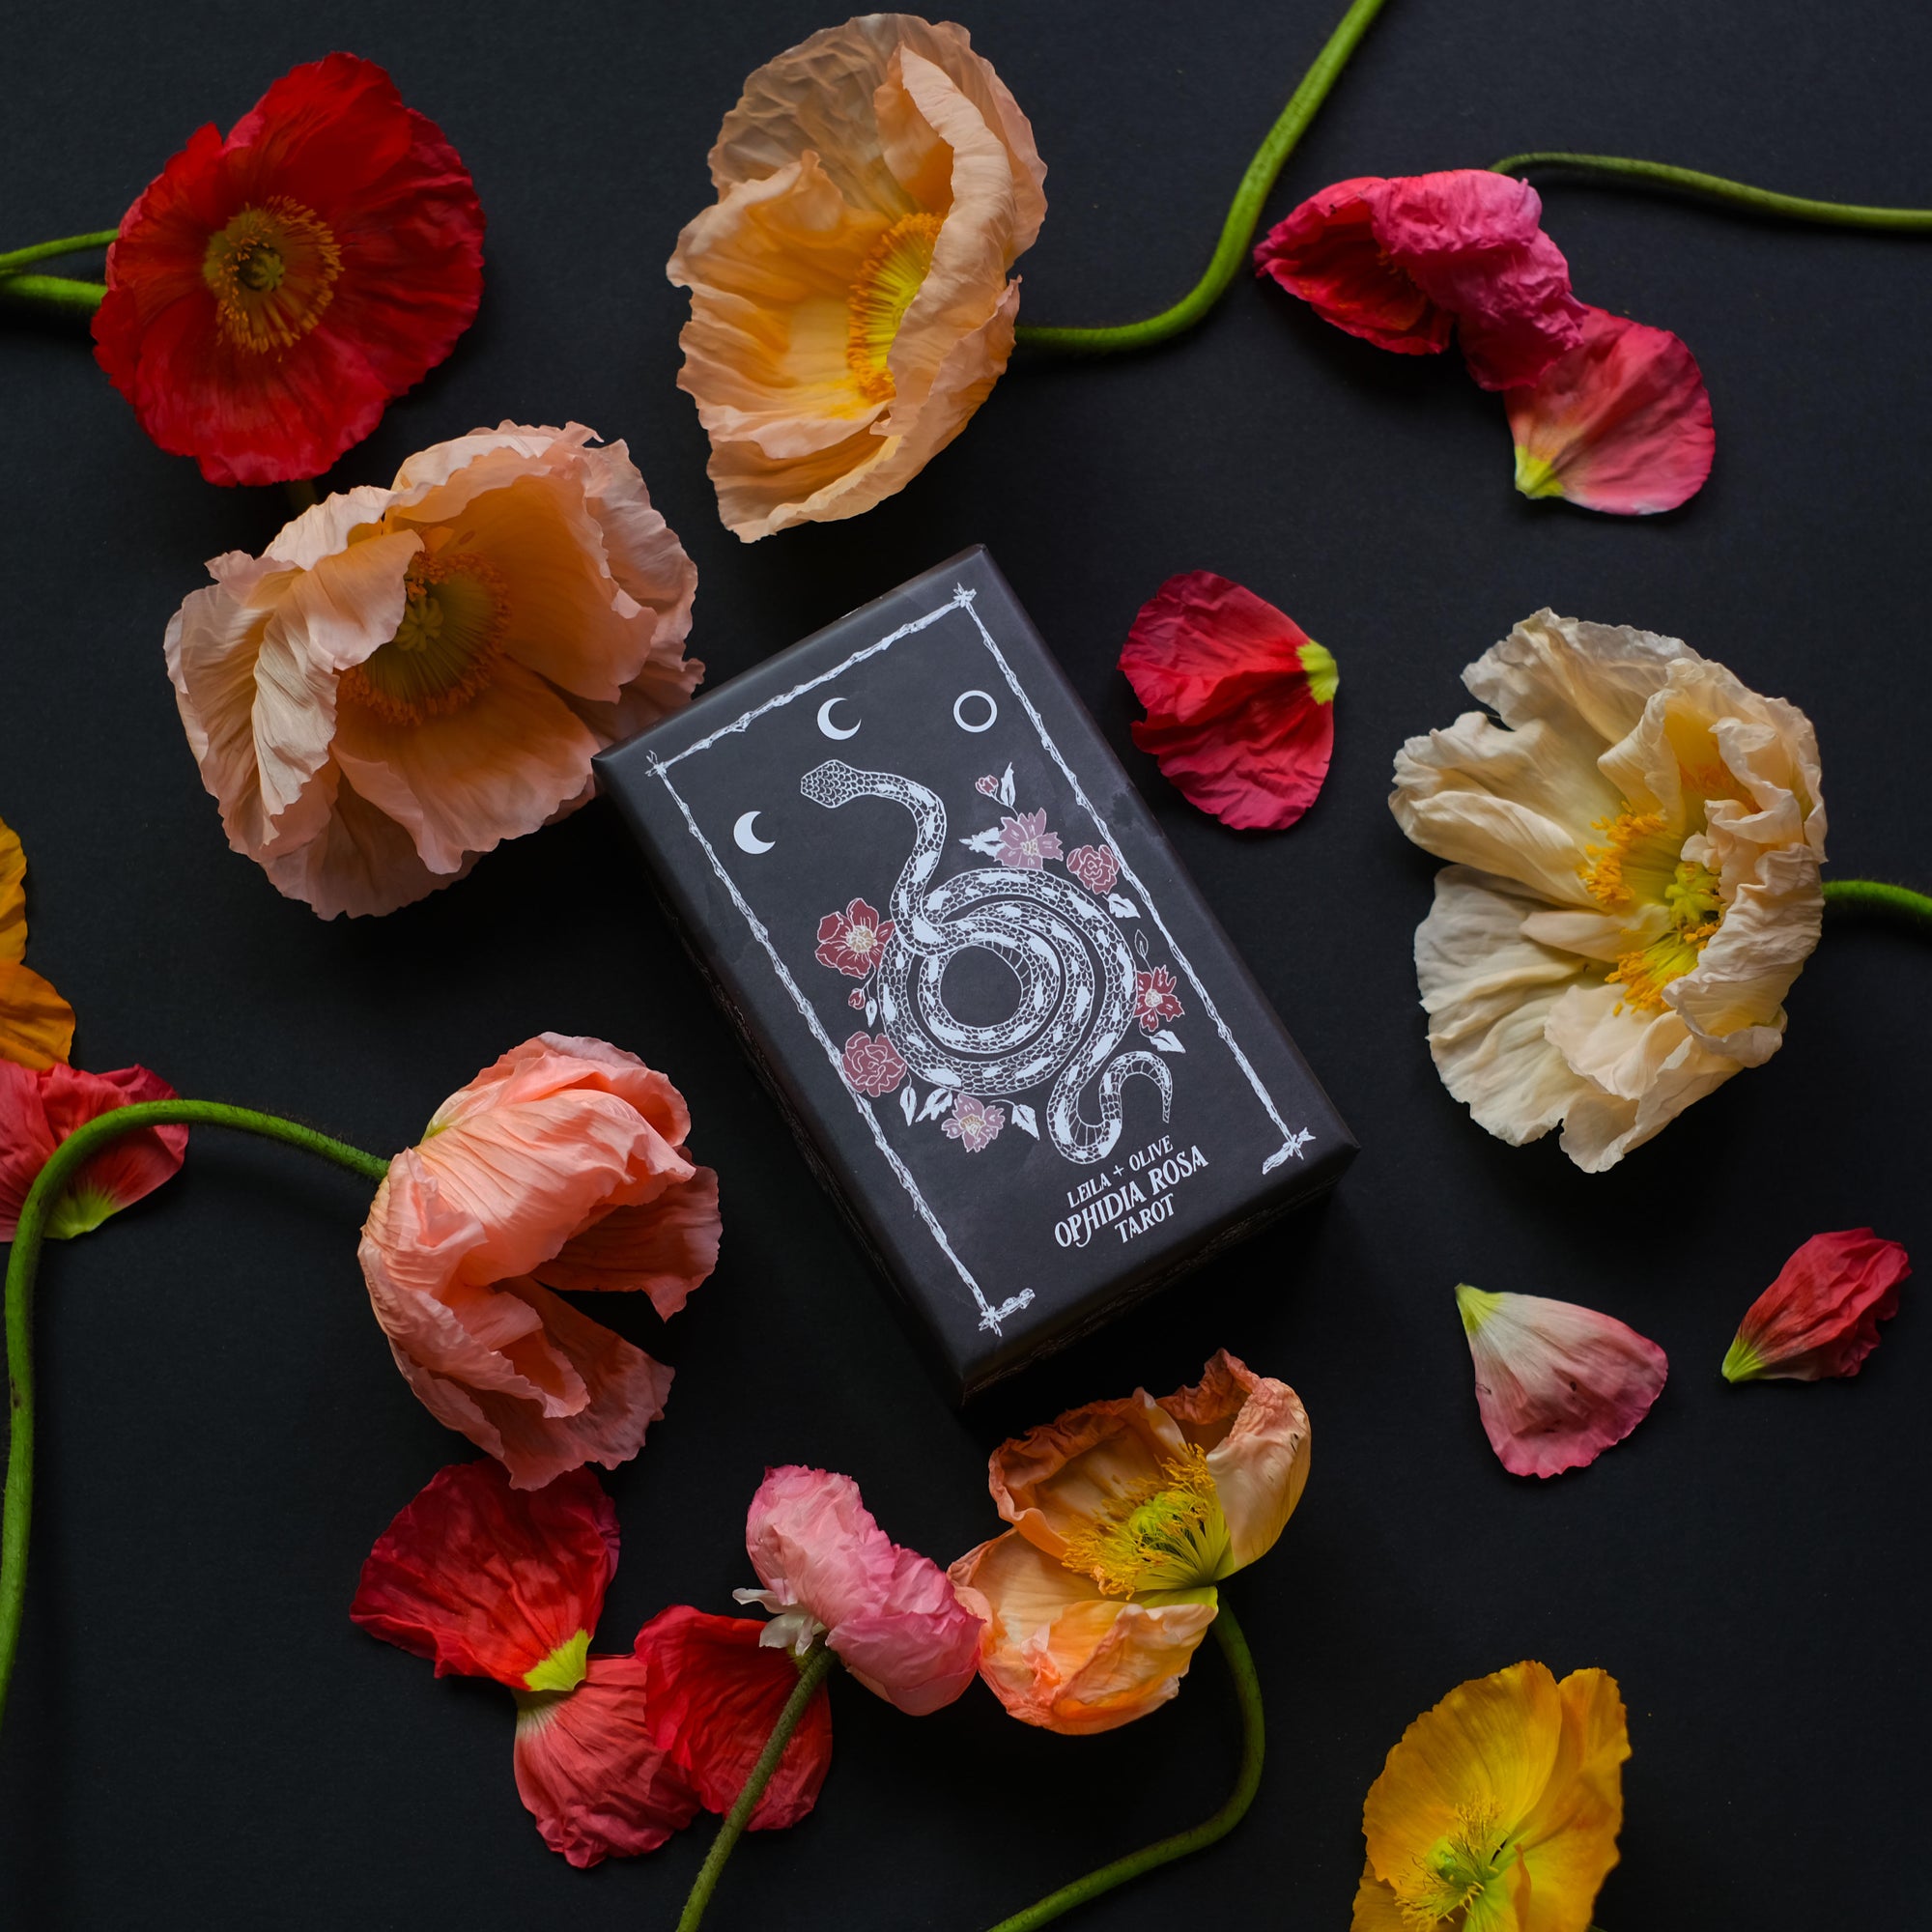 Botanical Tarot deck, the Ophidia Rosa, is illustrated by hand and rooted in the plant kingdom.